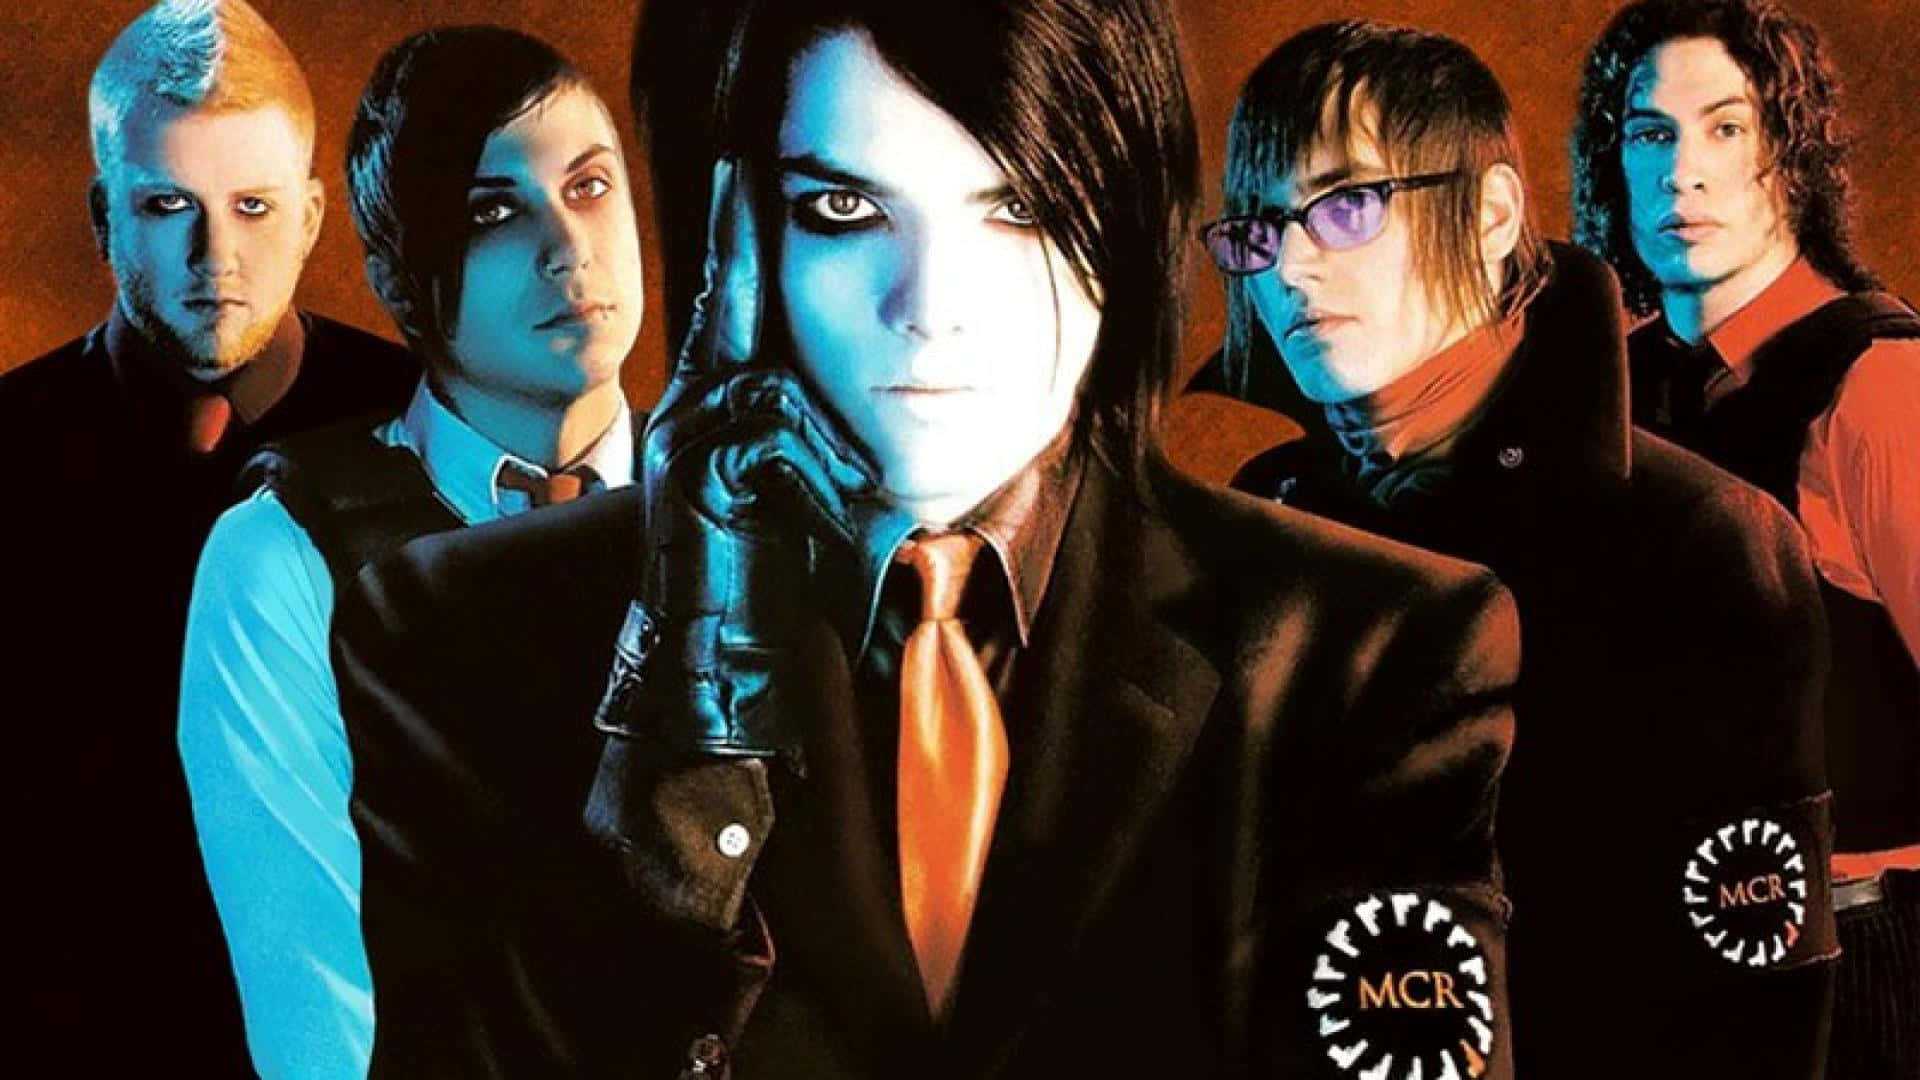 Wallpaper My Chemical Romance  My chemical romance wallpaper My chemical  romance Band wallpapers